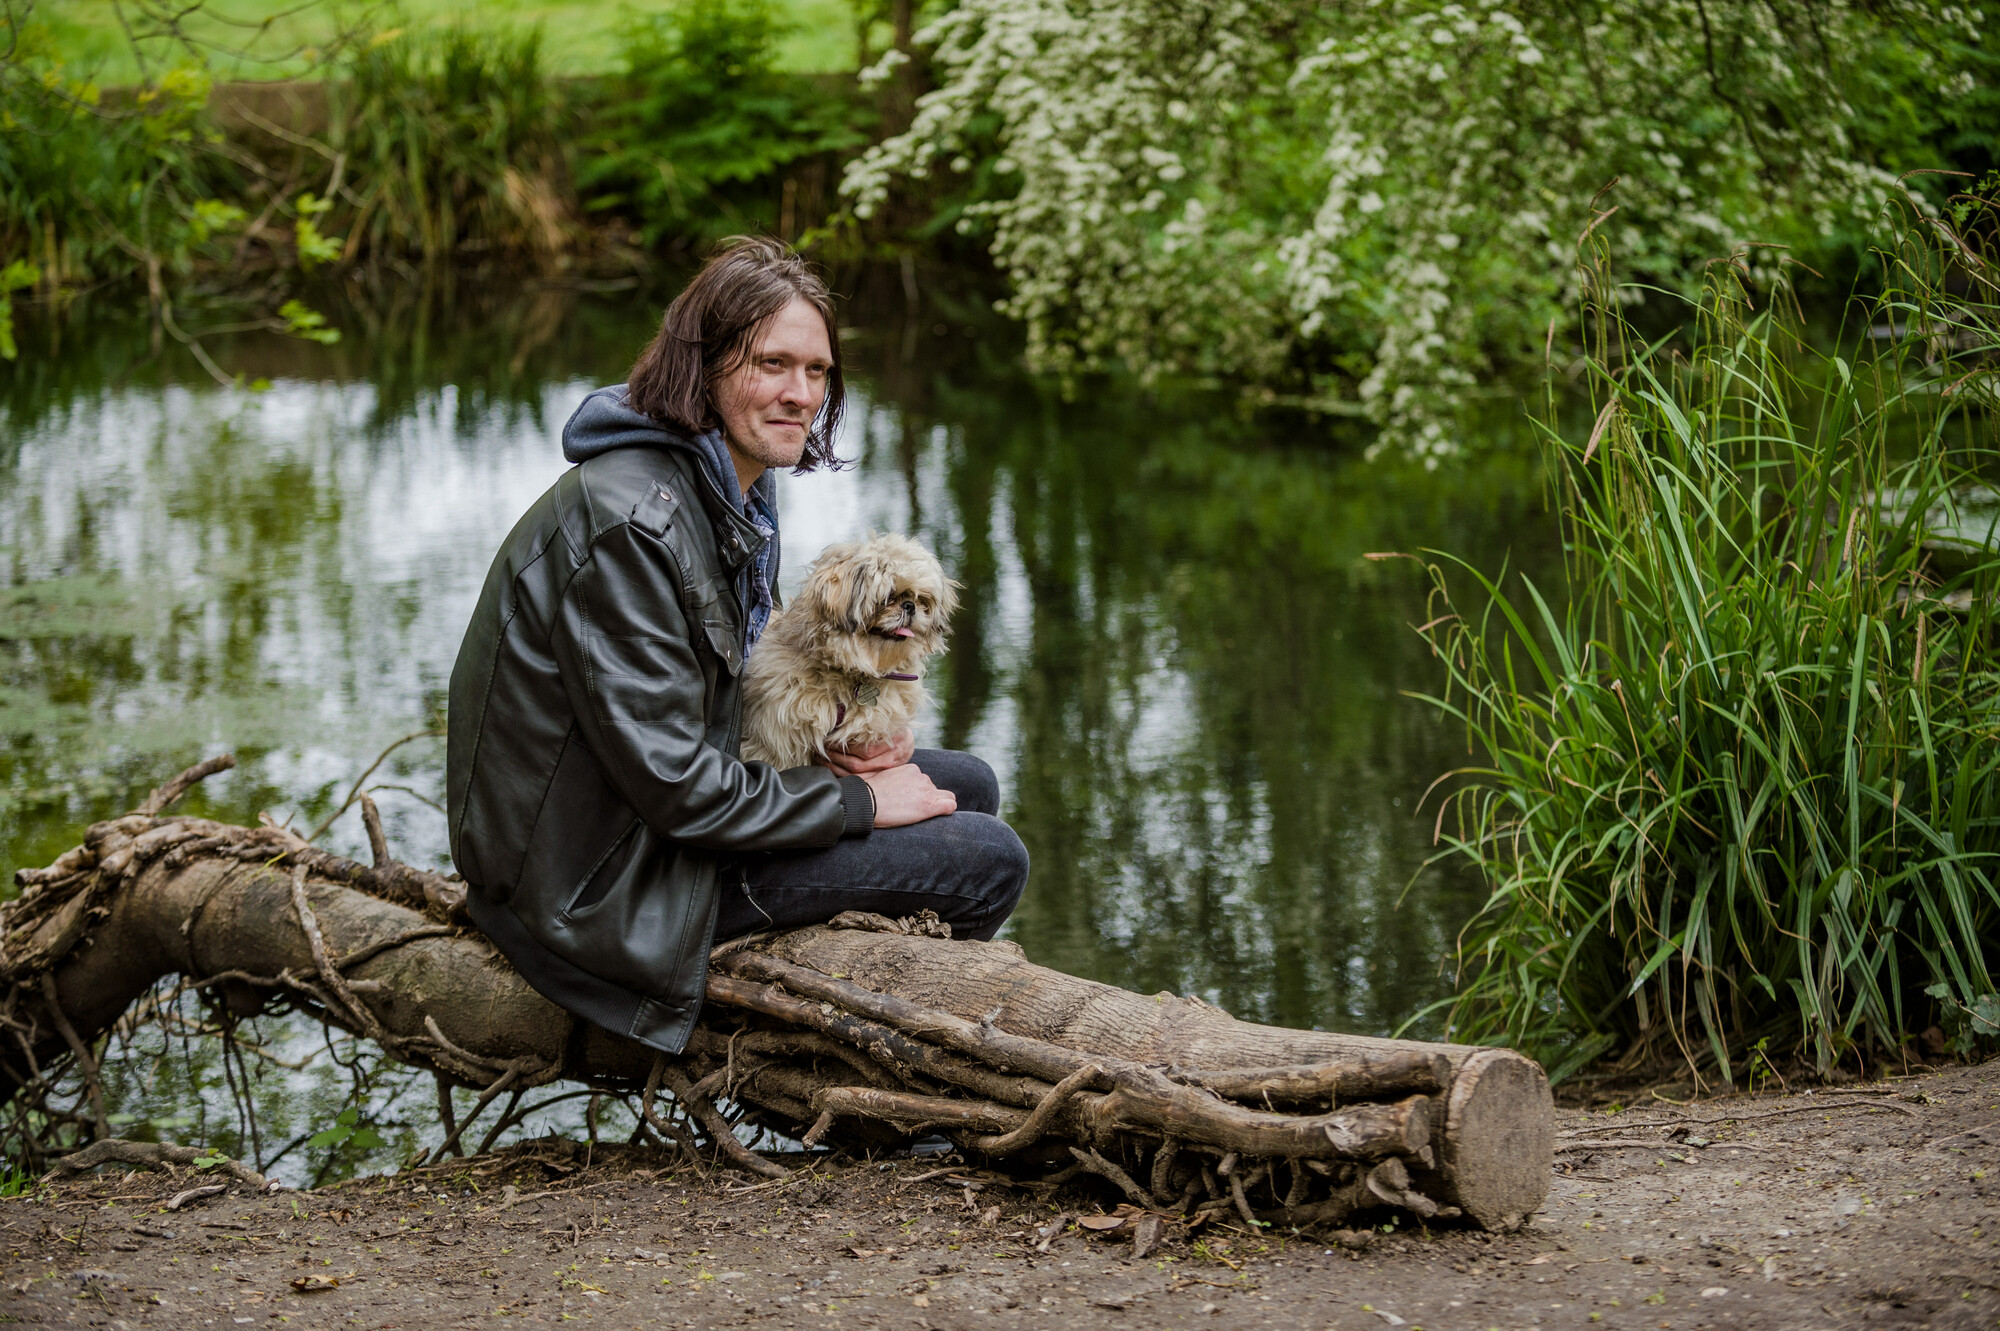 James and Chewbie sitting together on a log beside a river